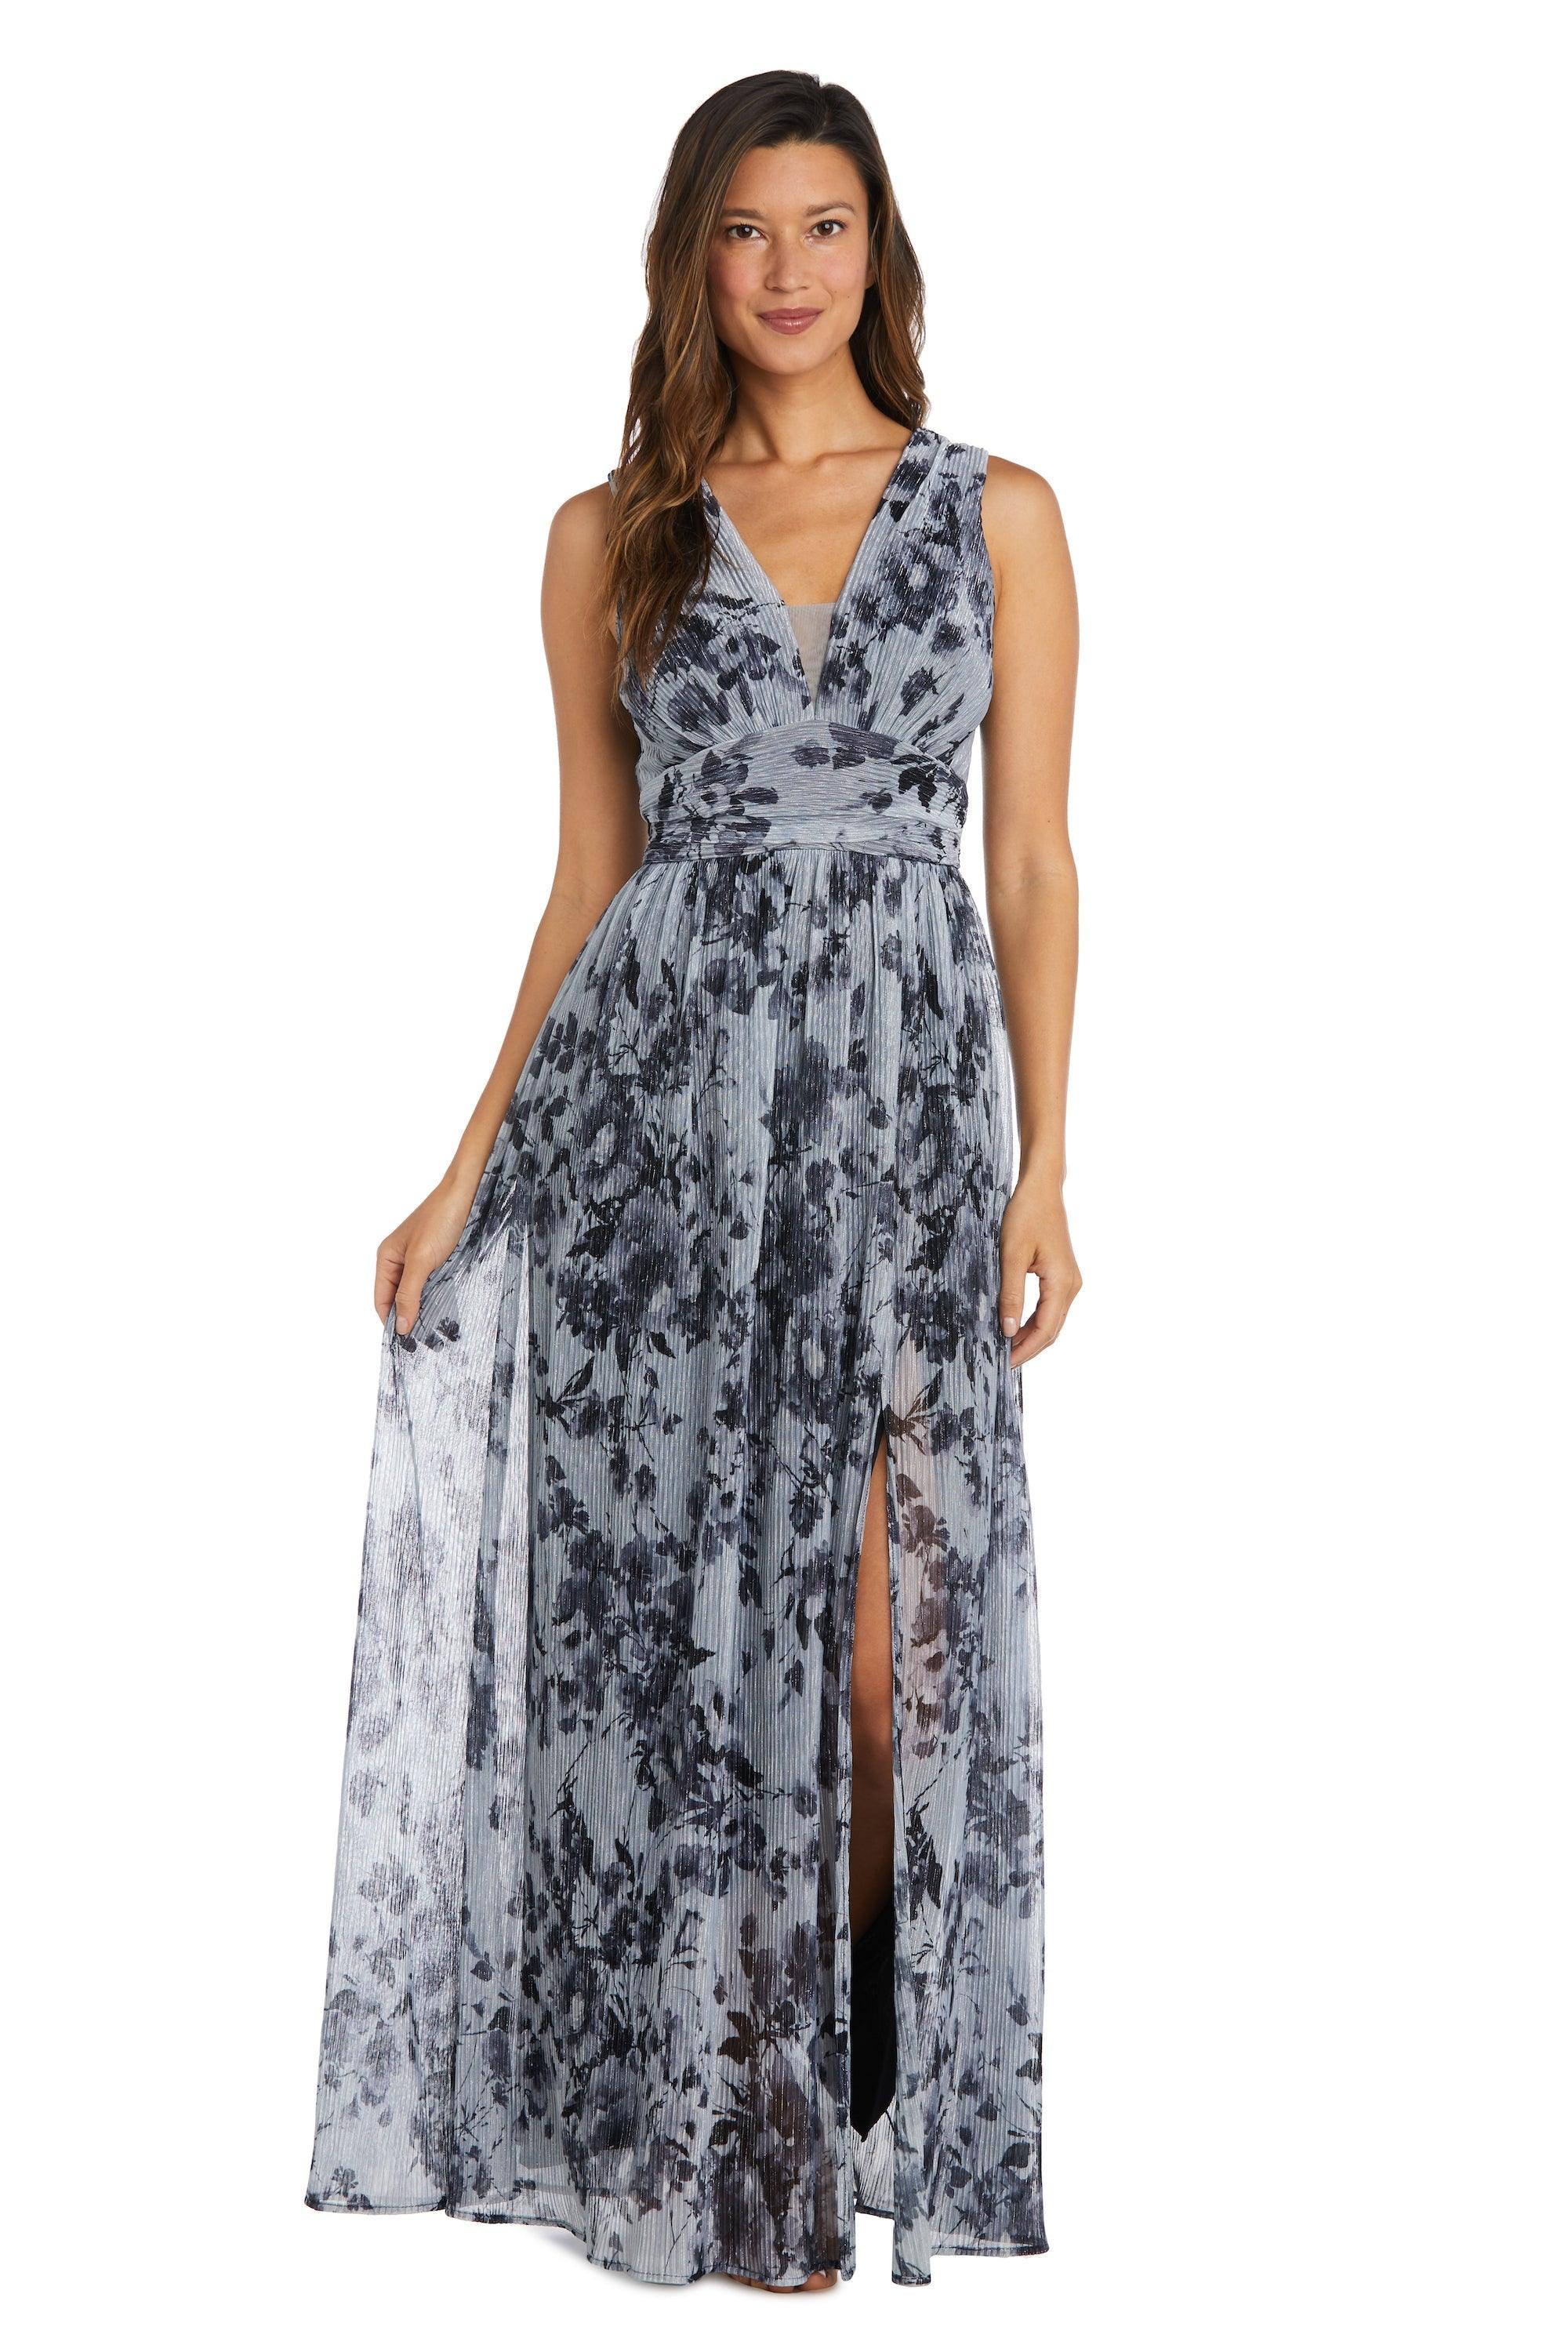 Nightway Long Formal Floral Petite Dress 22042P - The Dress Outlet